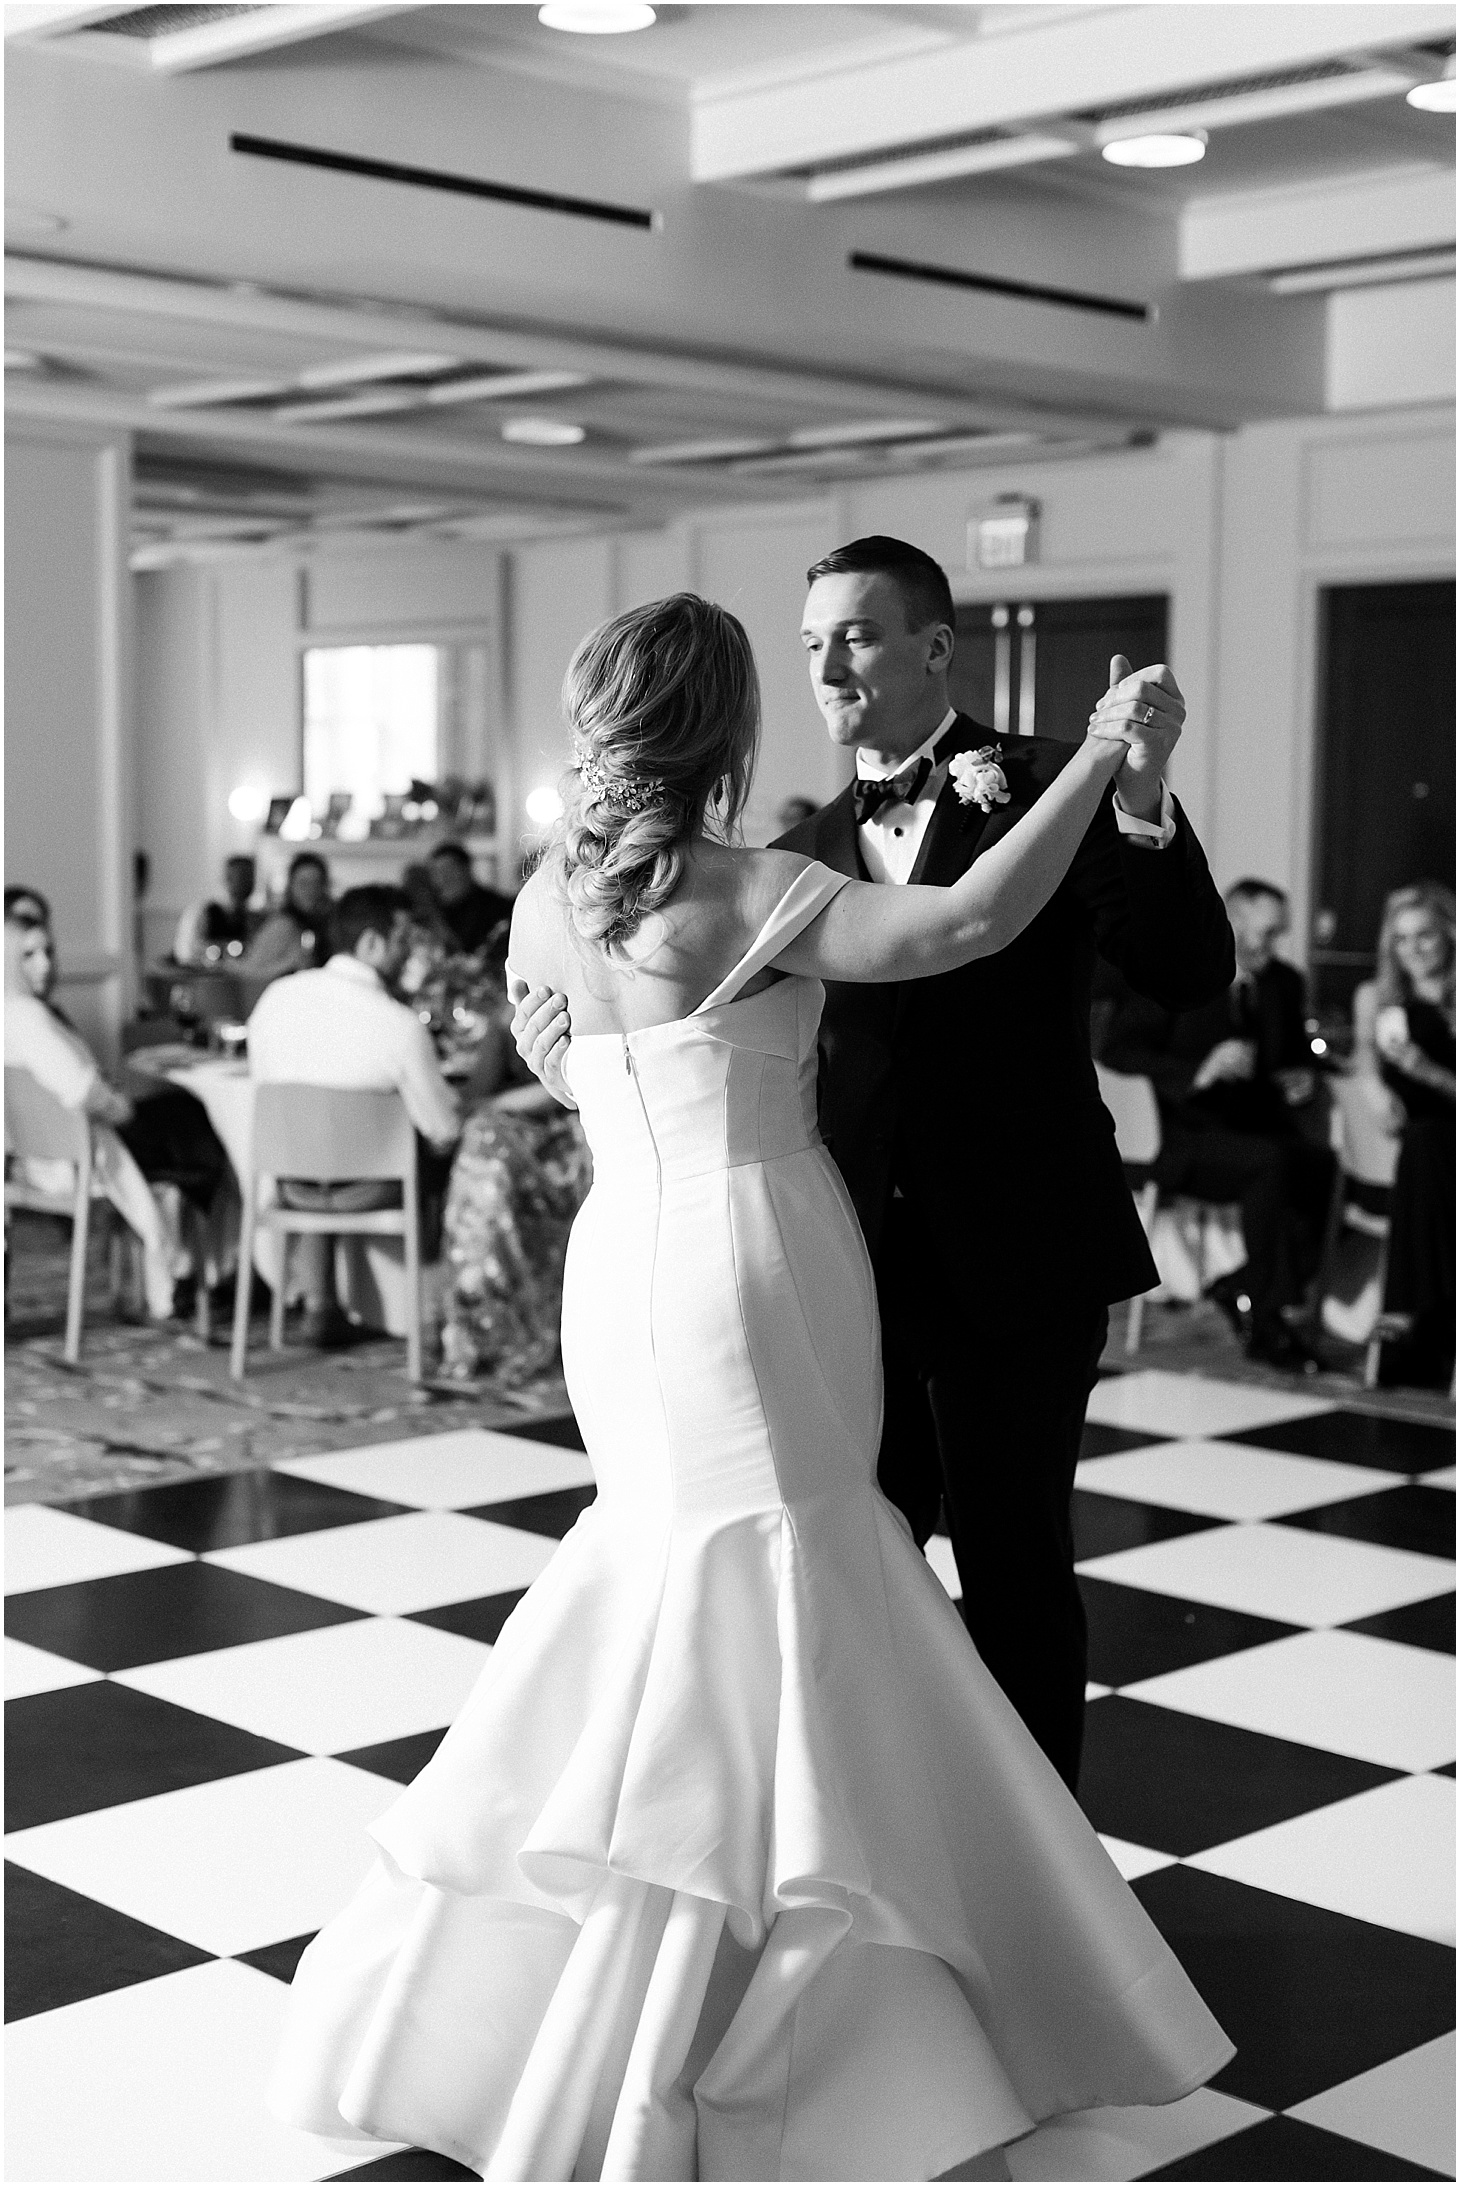 First Dance During Wedding Reception at The LINE Hotel DC, Modern Spring Wedding at The LINE Hotel DC, Wedding Ceremony at National United Methodist Church, Sarah Bradshaw Photography, DC Wedding Photographer